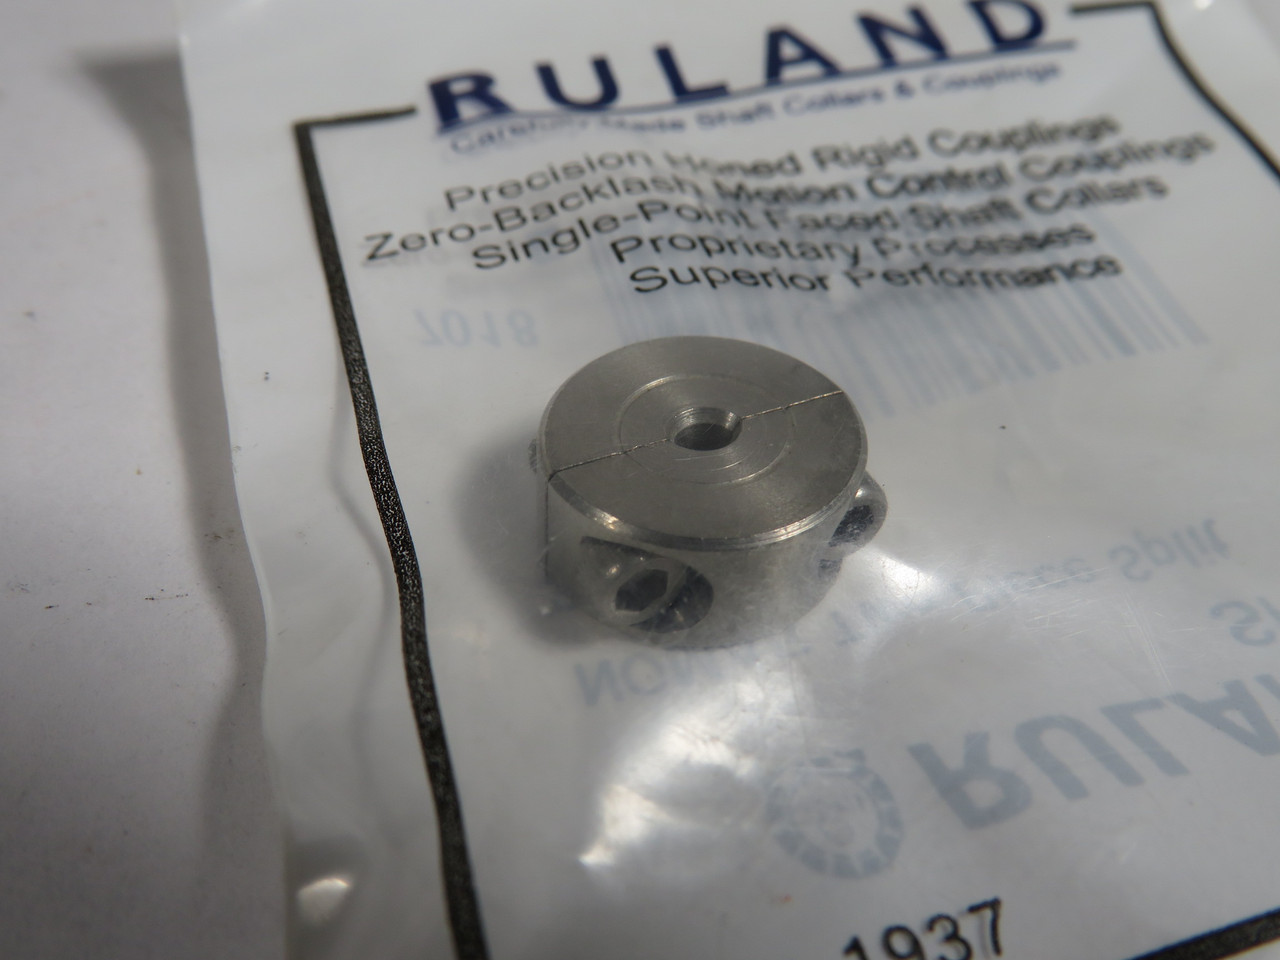 Ruland SP-2-SS Two-Piece Clamping Shaft Collar 1/8" ID 5/8" OD 0.281" W NWB